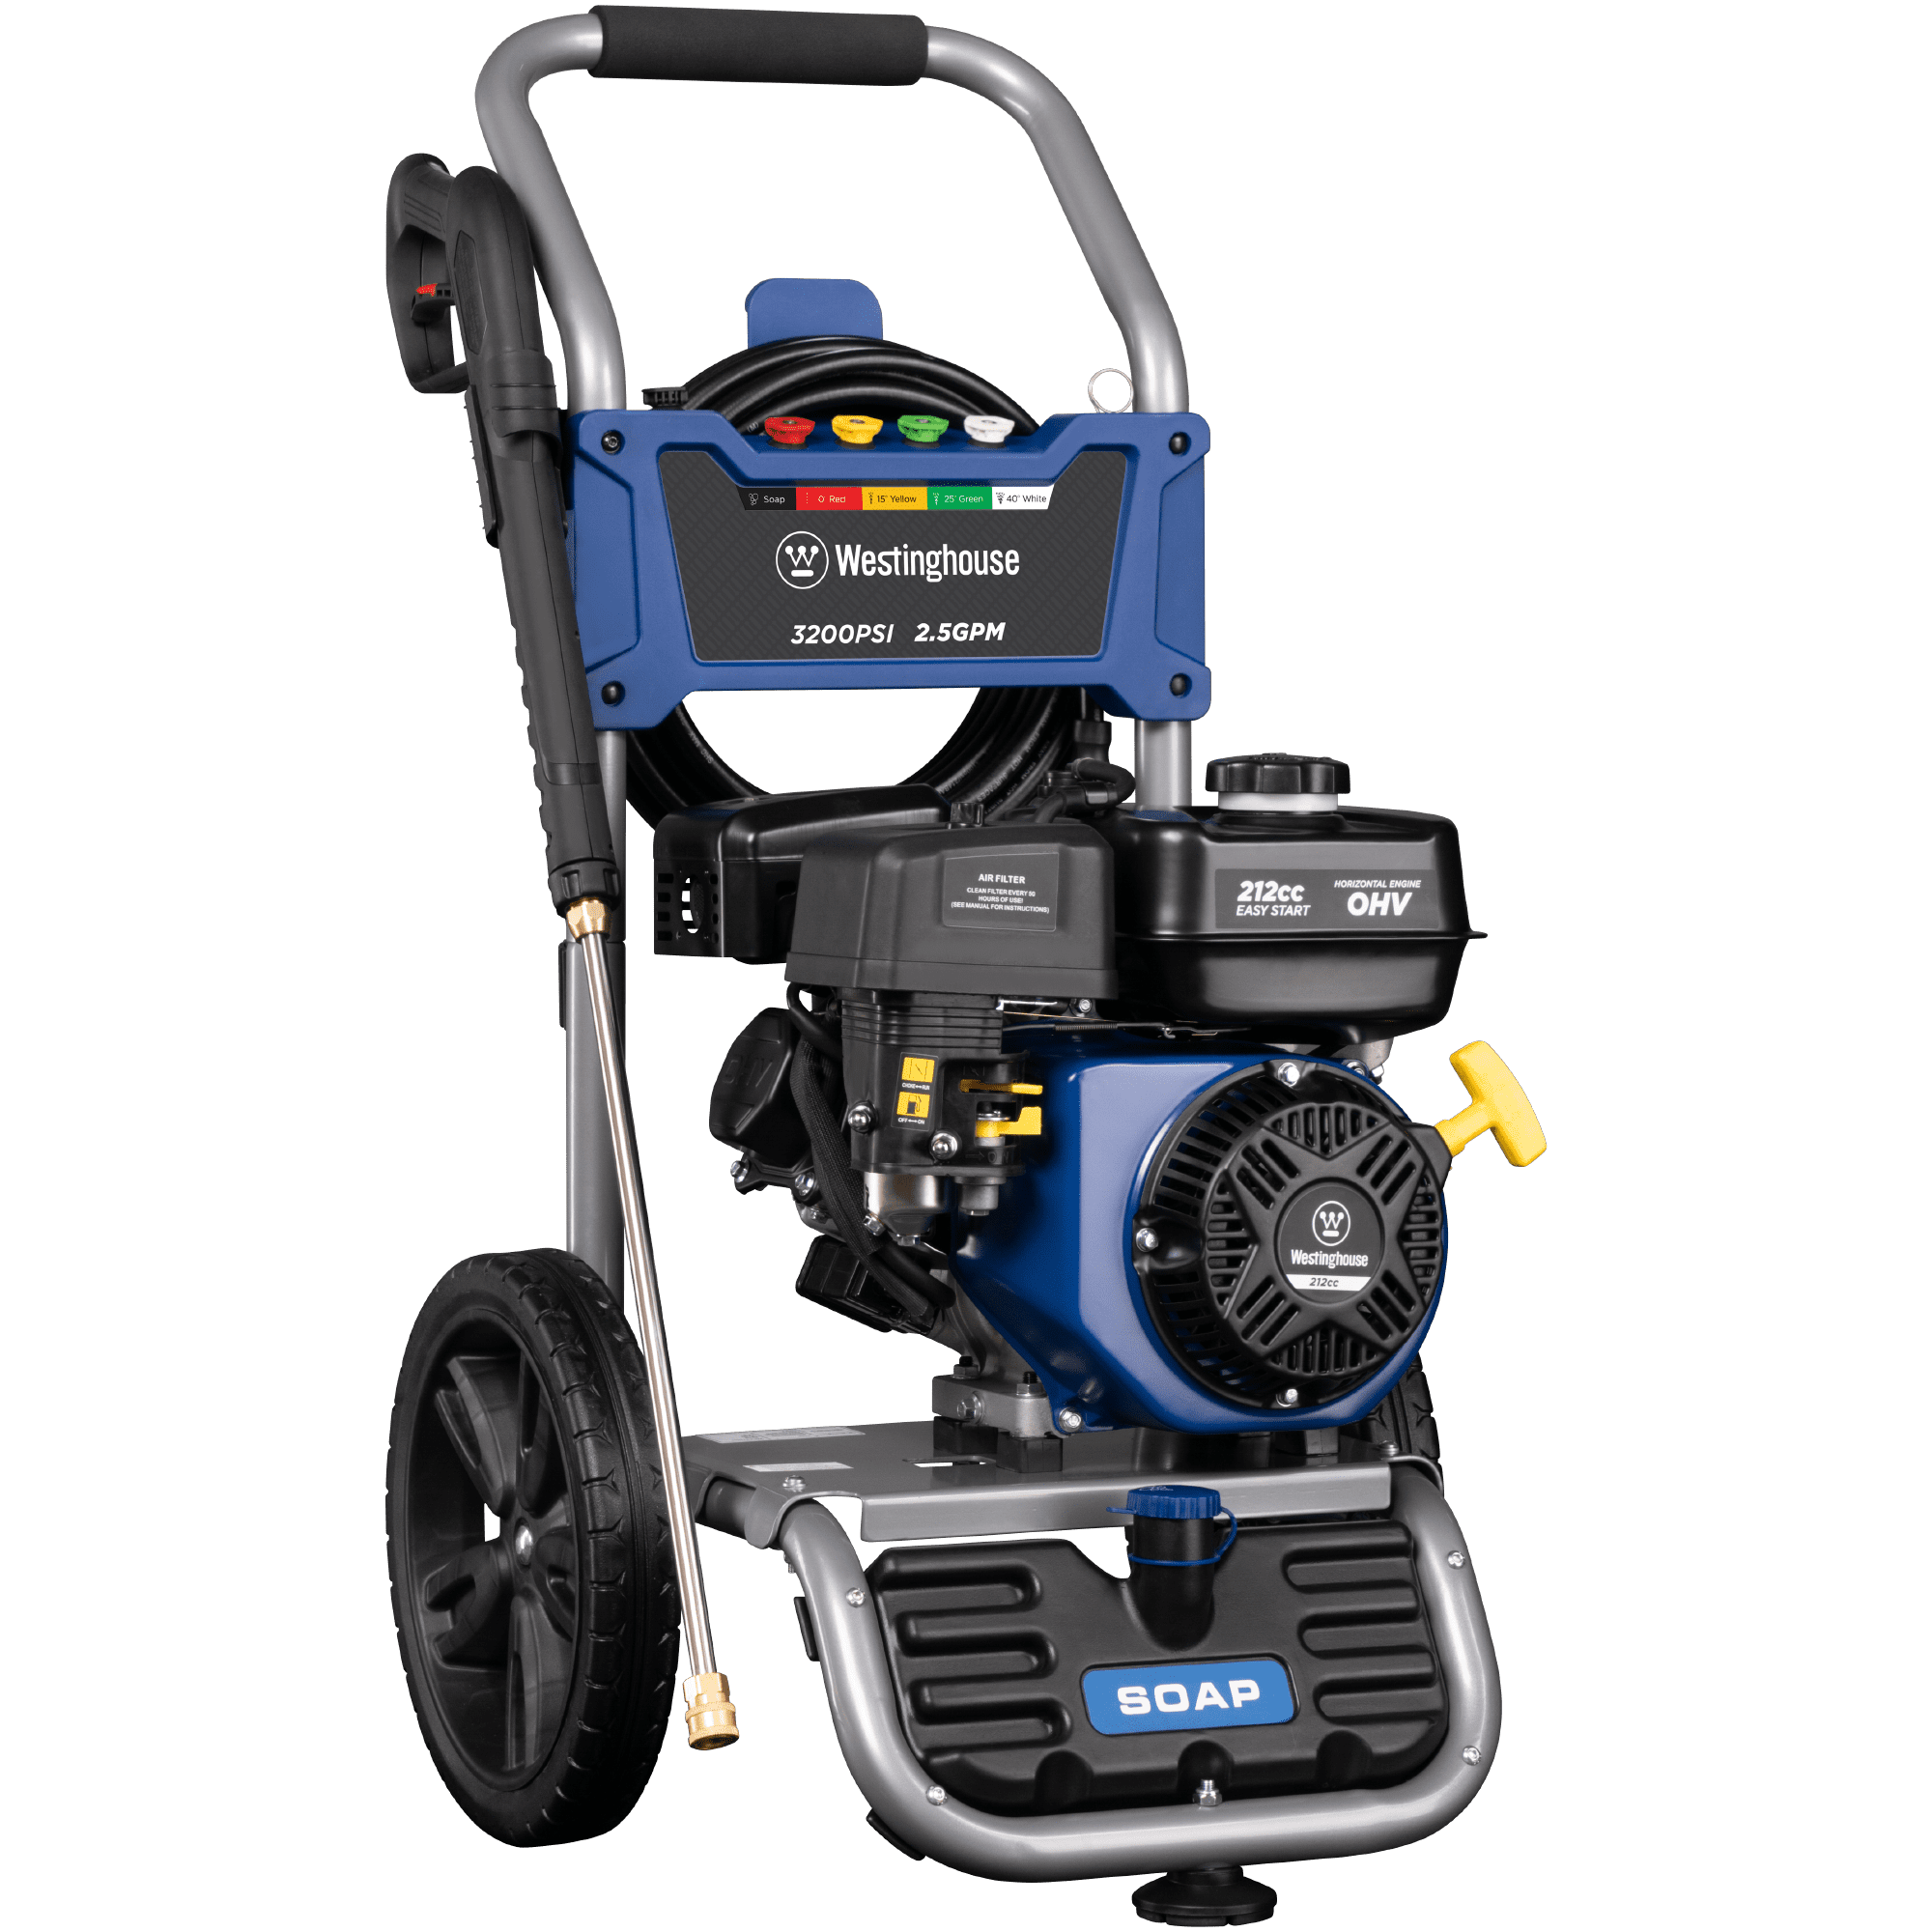 westinghouse-wpx3200-gas-powered-pressure-washer-walmart